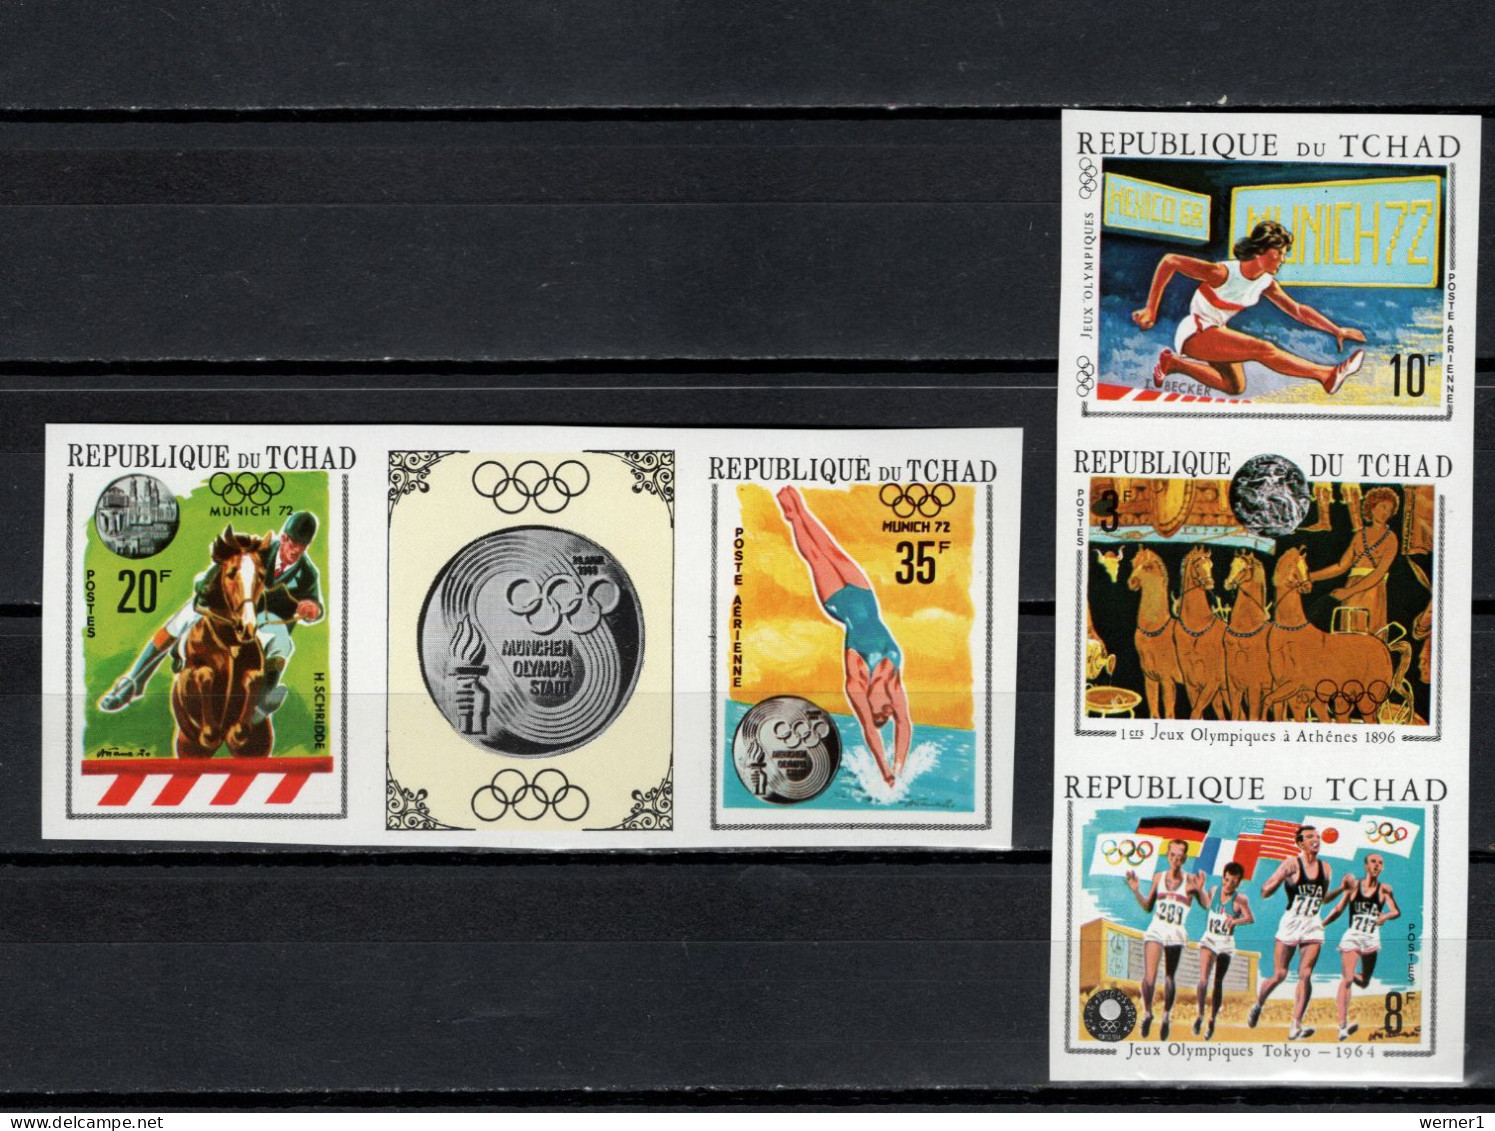 Chad - Tchad 1970 Olympic Games From Athens To Munich, Equestrian Etc. Set Of 5 In 2 Strips Imperf. MNH - Summer 1972: Munich